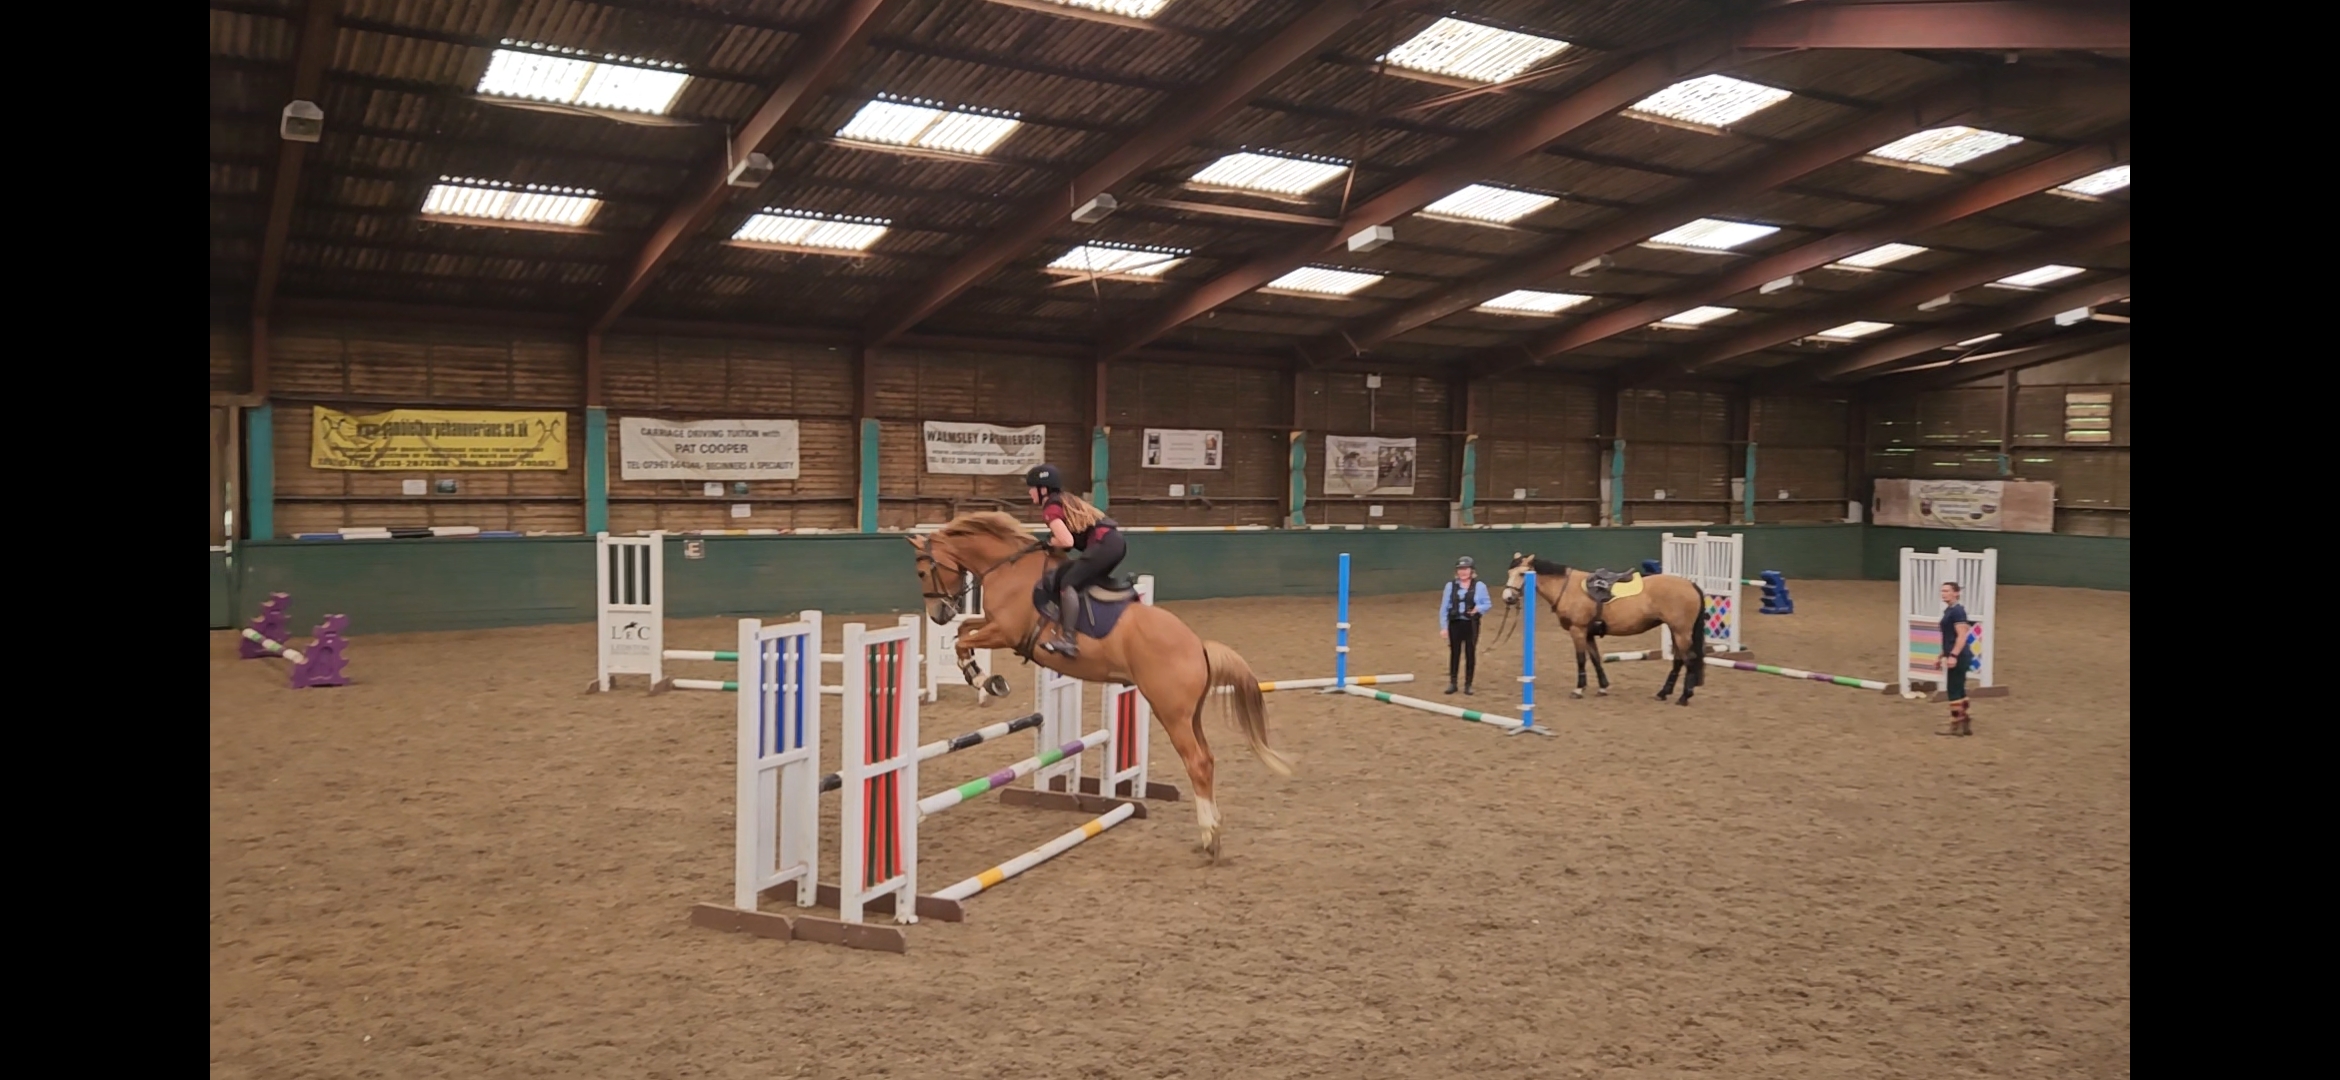 Horse Events UK Monday 31 July 2023 Gymnastic Jumping, Poles and Cavalettis Clinic Ledston Equestrian 